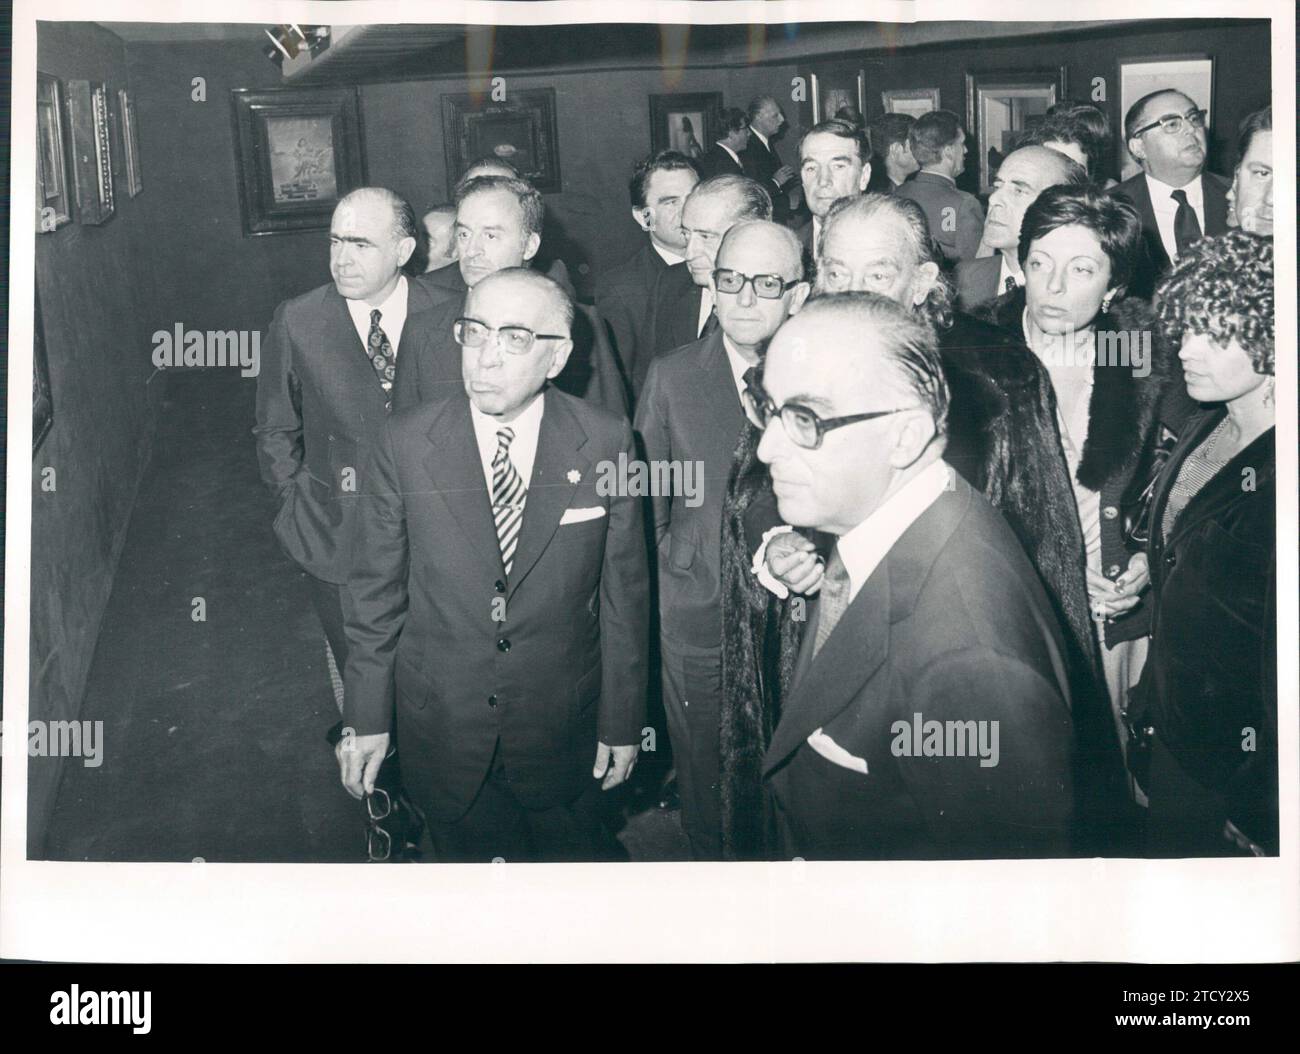 Figueras (Gerona), 9/29/1974. Inauguration of the Dalí Theater Museum. In the image Dalí with the Minister of the Interior, José García Hernández and other authorities. Credit: Album / Archivo ABC / Juan Cid Stock Photo